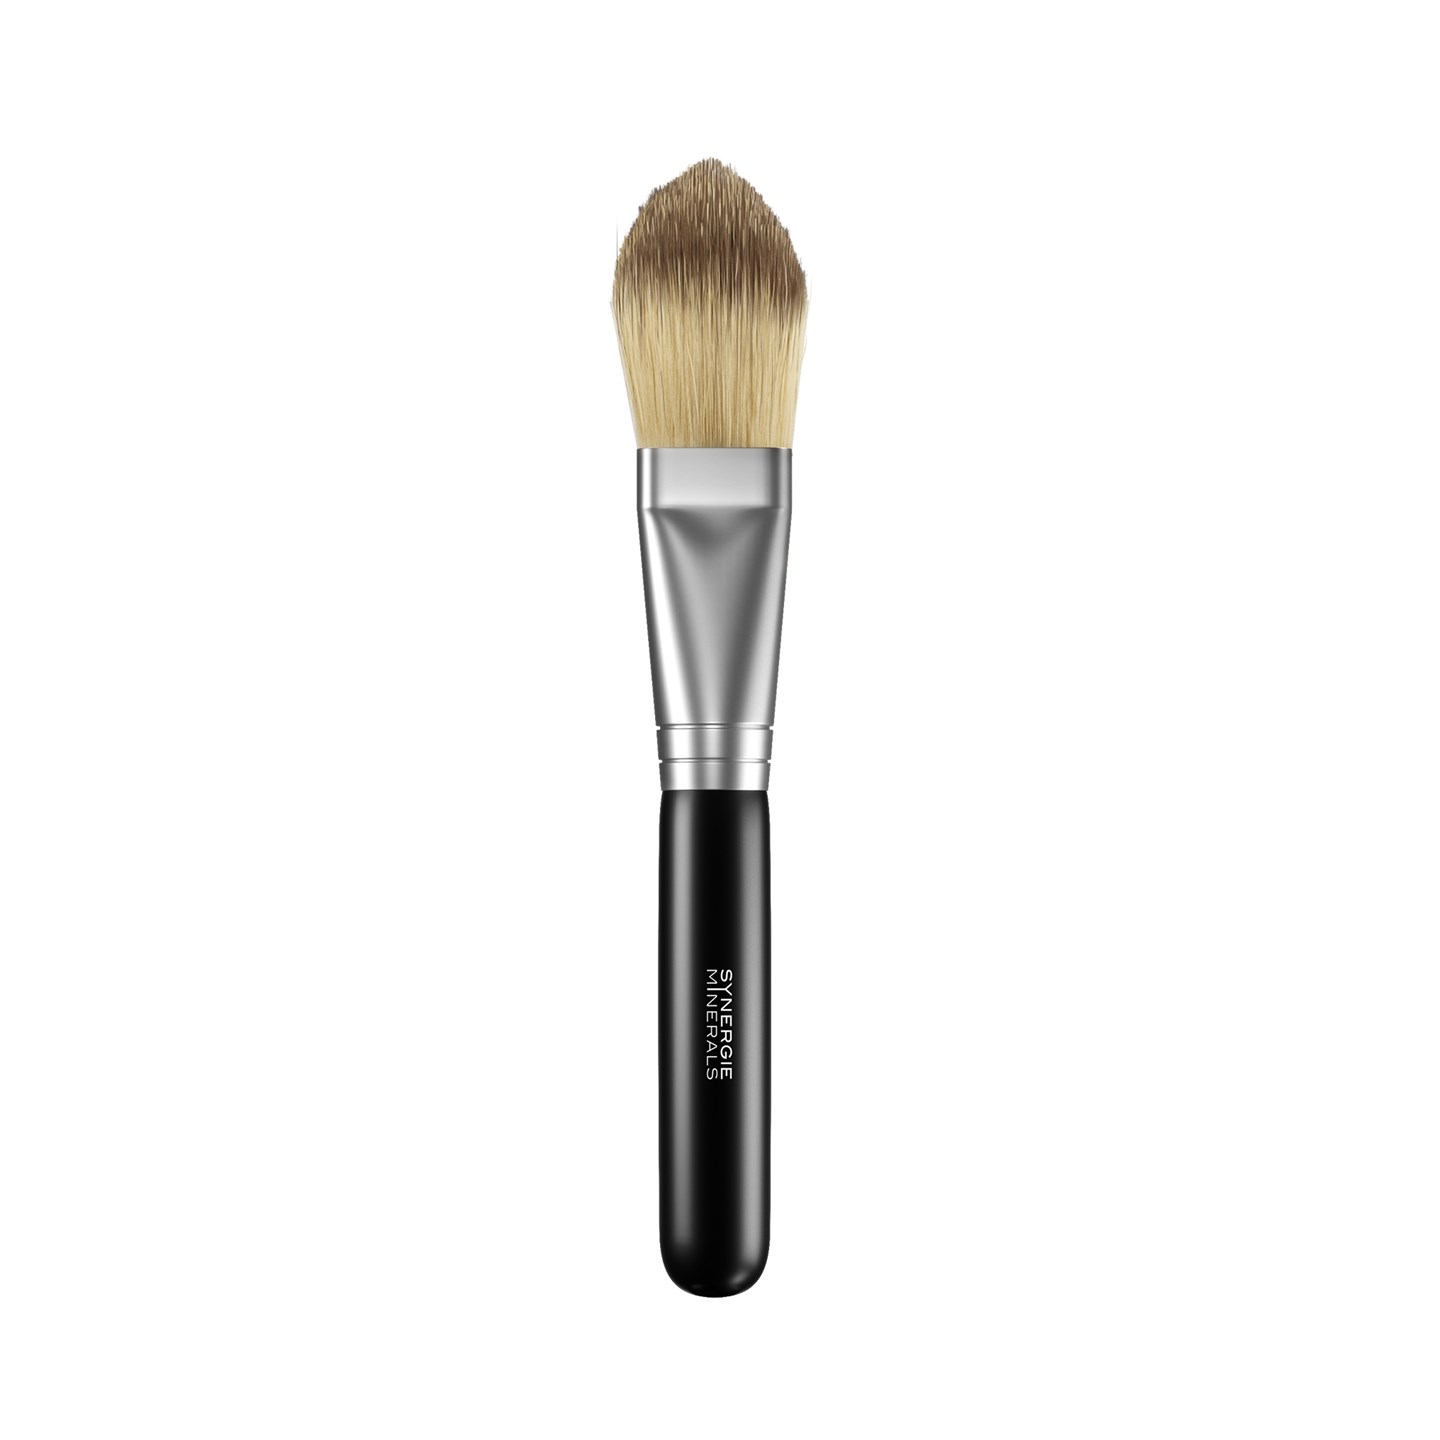 Synergie Minerals Camouflage Brush - Large